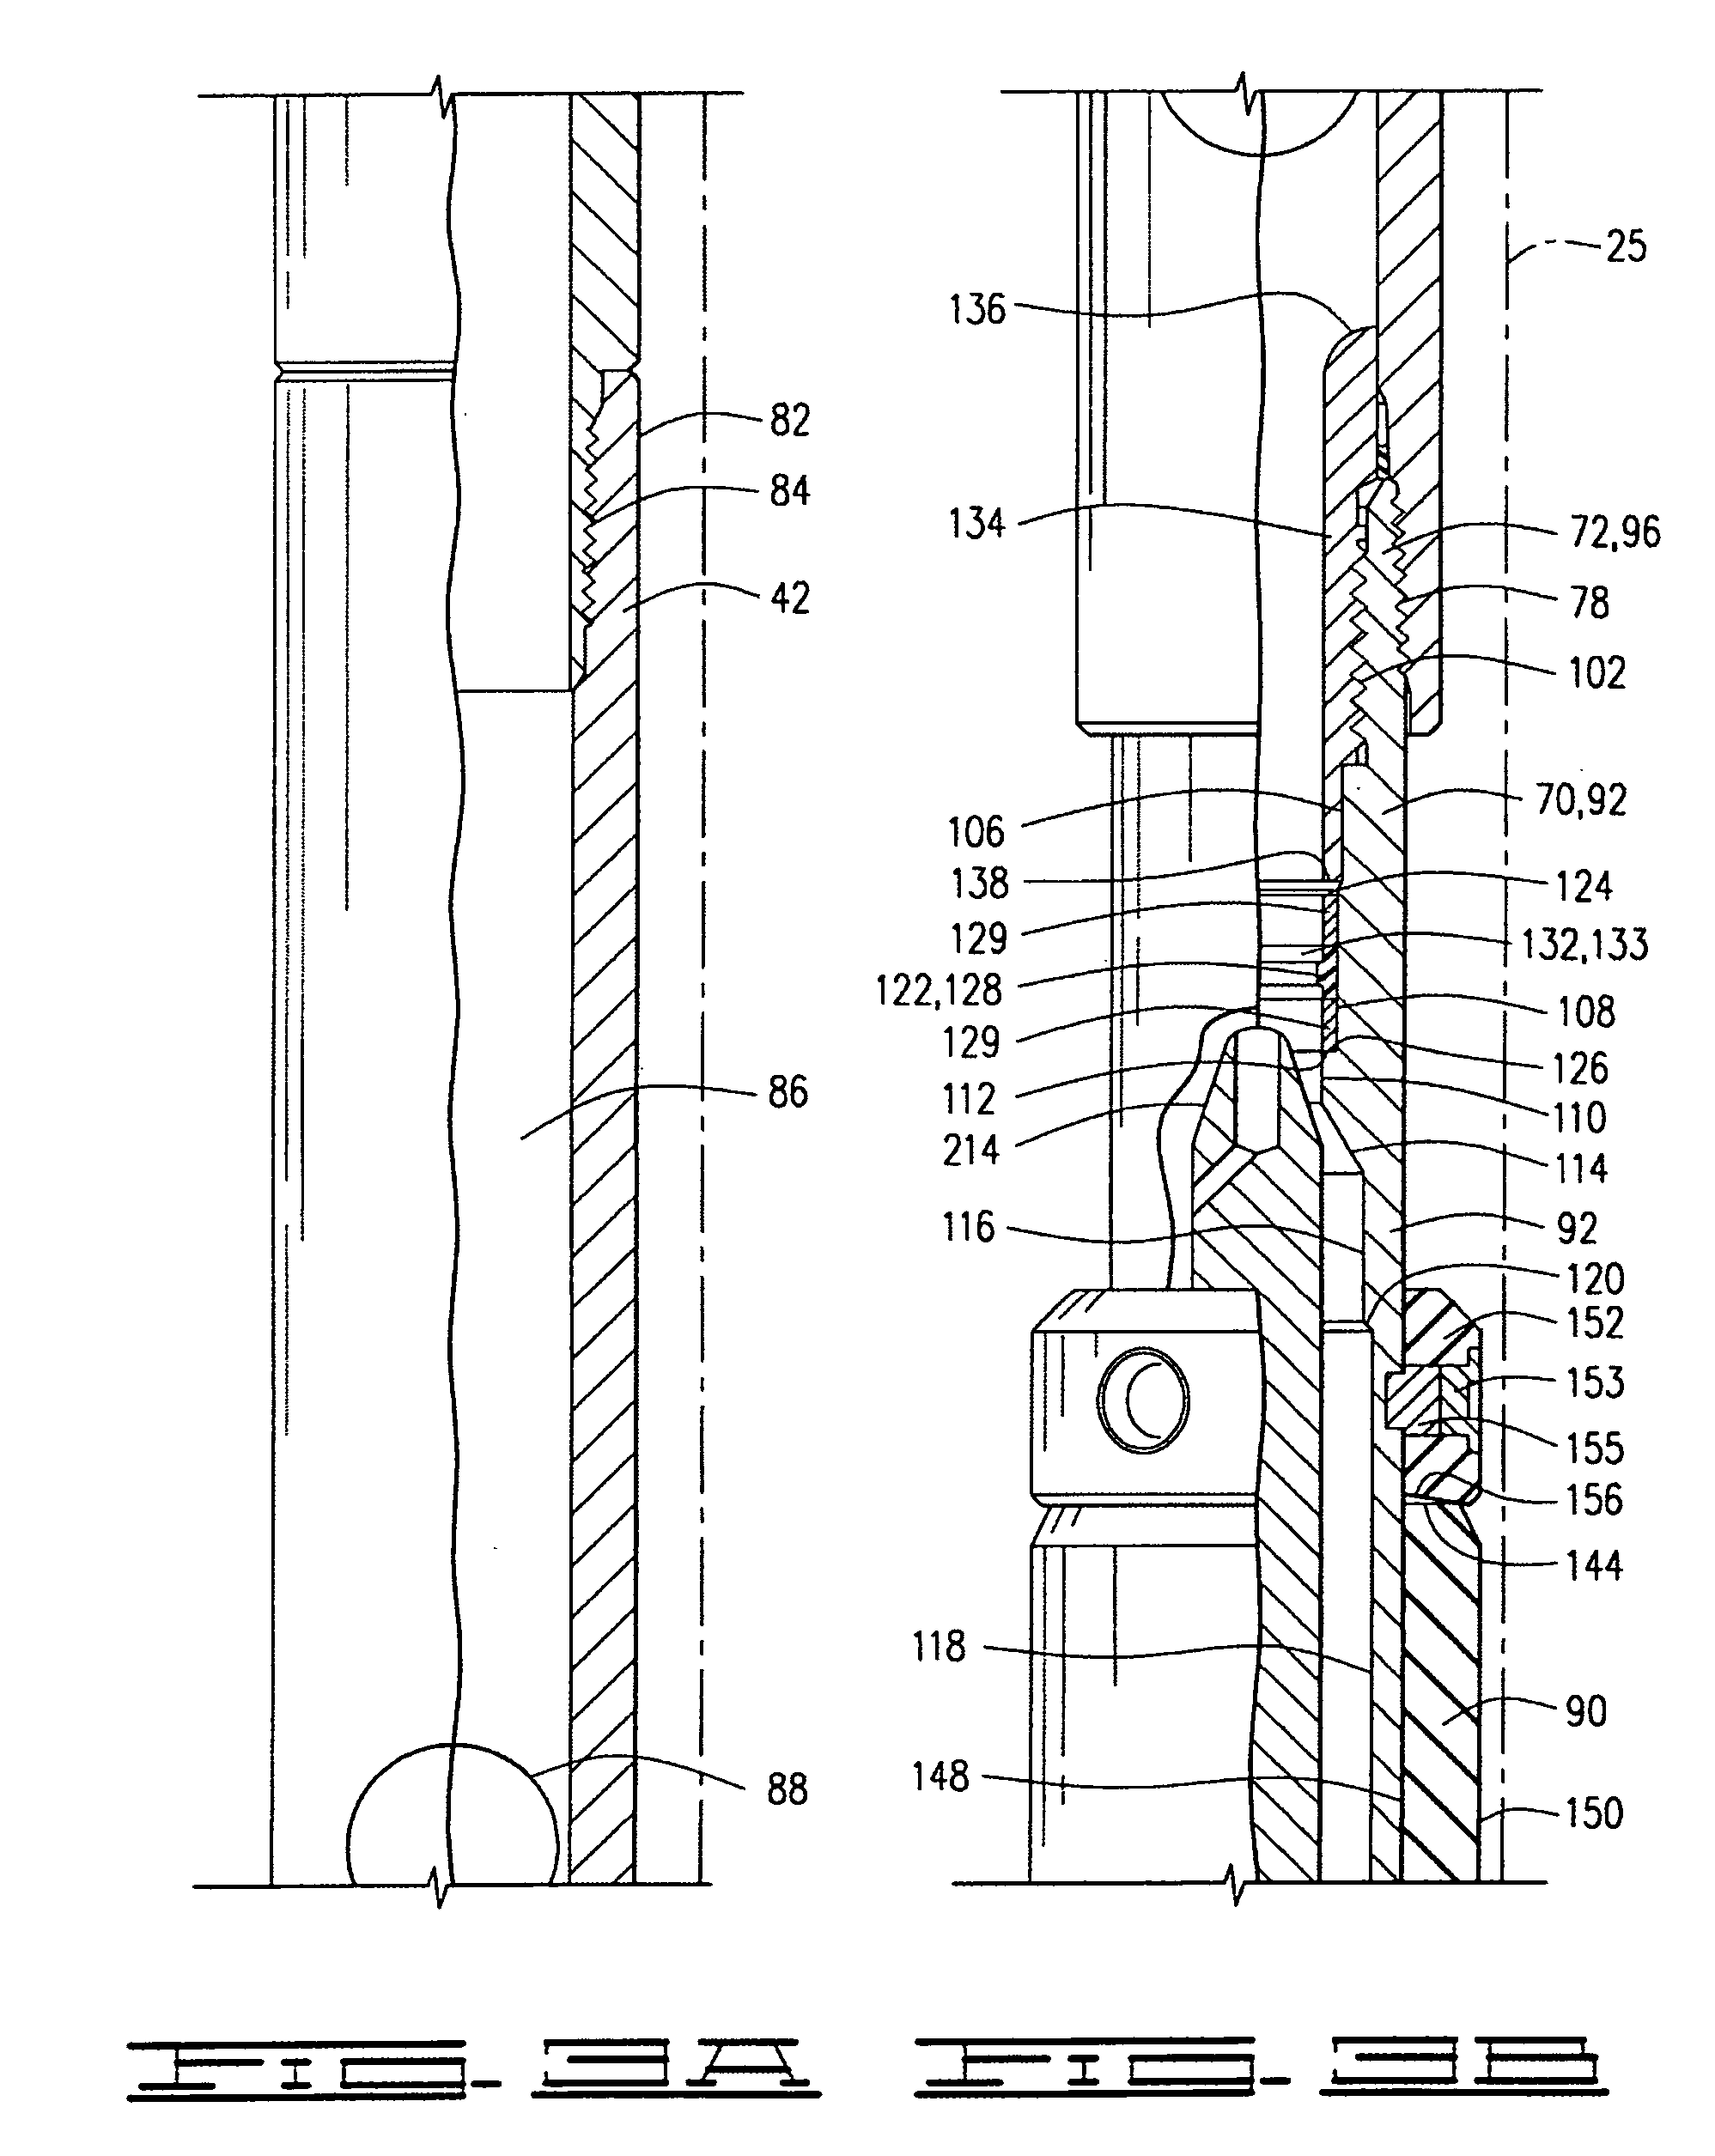 Methods of treating subterranean formations using low-molecular-weight fluids